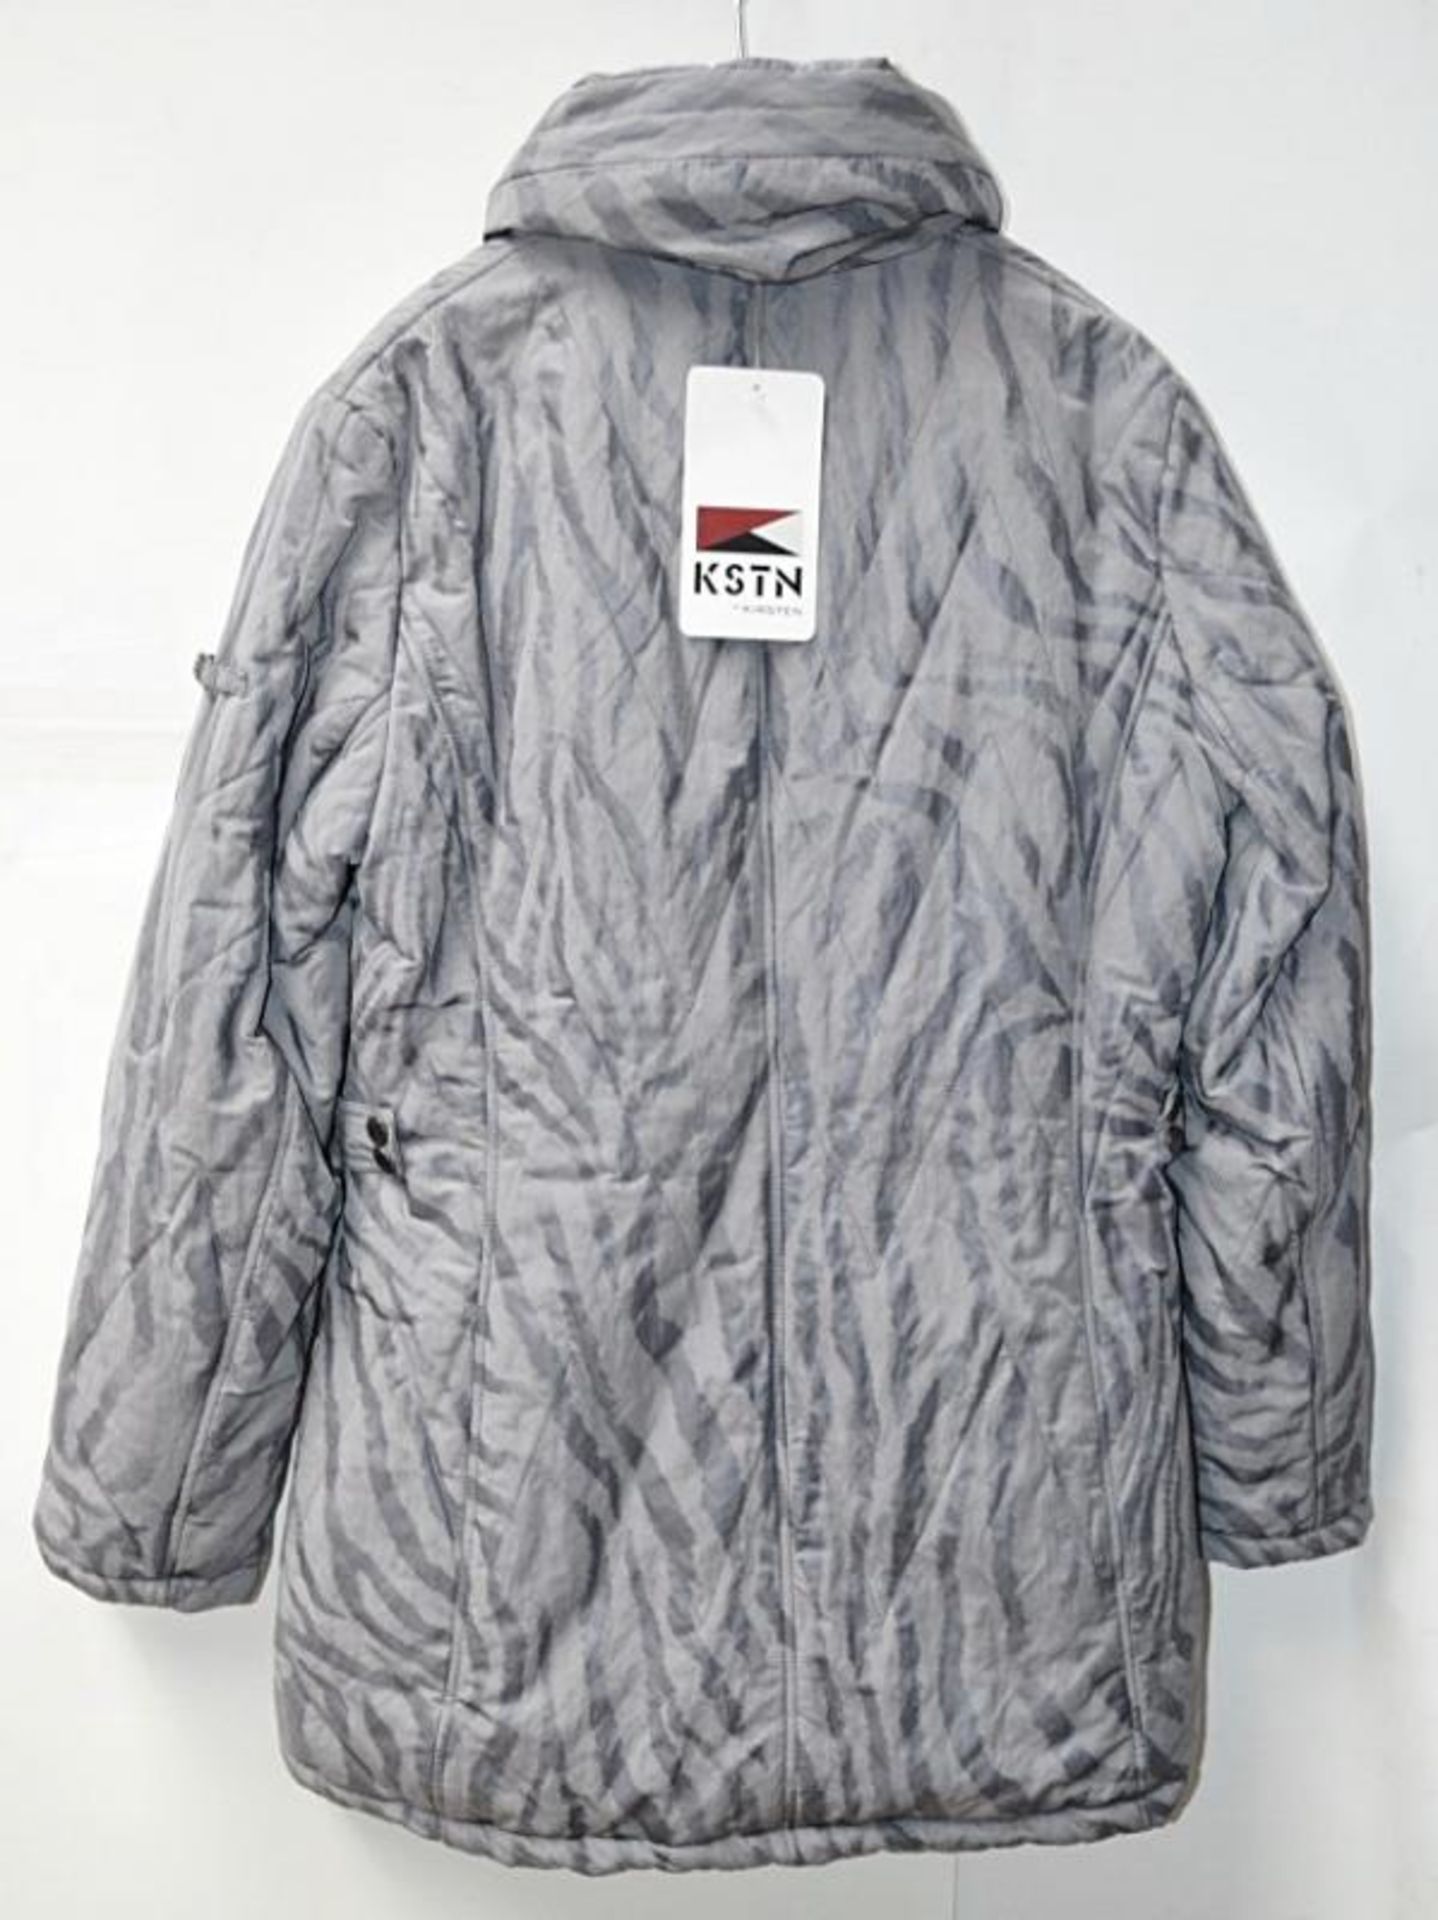 1 x Steilmann KSTN By Kirsten Womens Quilted Winter Jacket - Colour: Silver Grey Animal Print - CL21 - Image 5 of 9